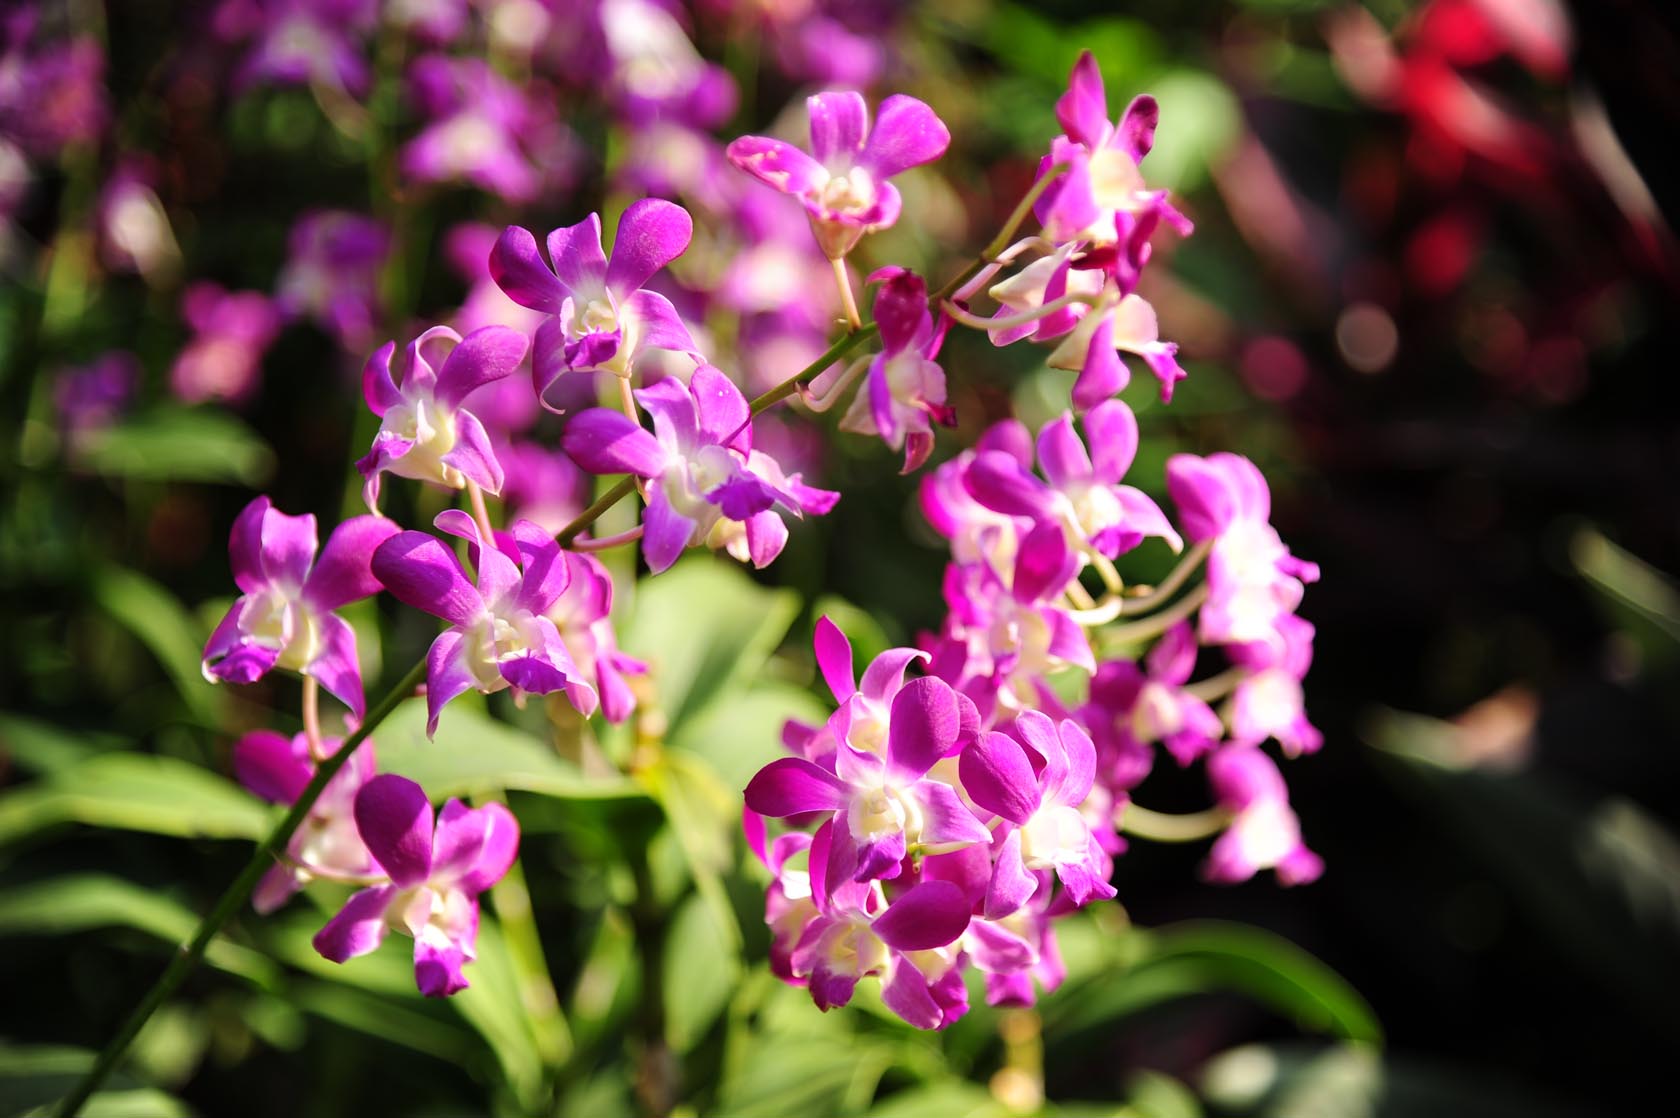  Explore the beauty and diversity of orchids with our volunteer guides in this one-hour tour.